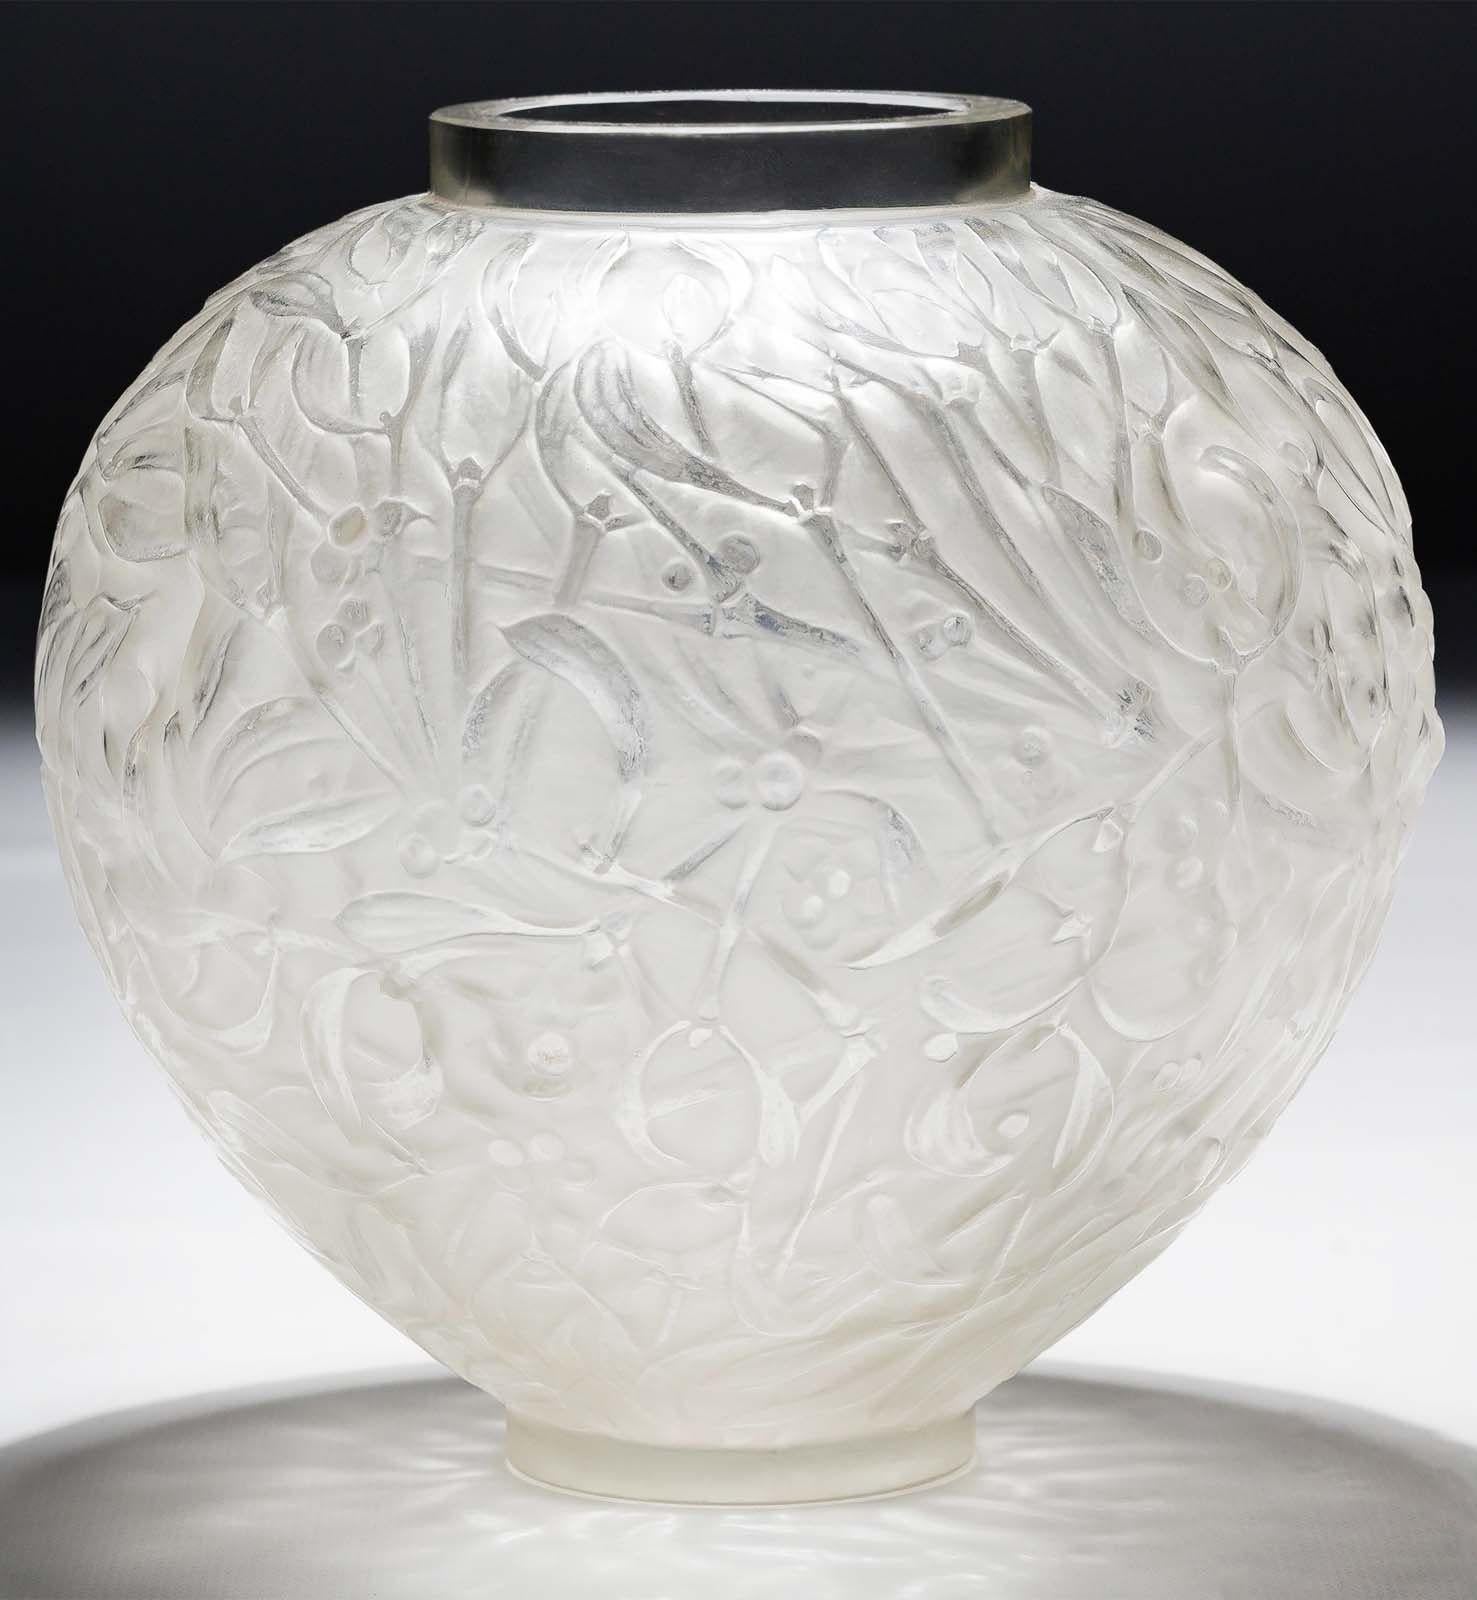 Vintage frosted glass vase by René Lalique made in France in the 1920's. 
The 'Gui' vase takes its name from the French word for mistletoe, a plant rich in symbolism and mystique. Lalique's signature organic design language comes to life as entwined